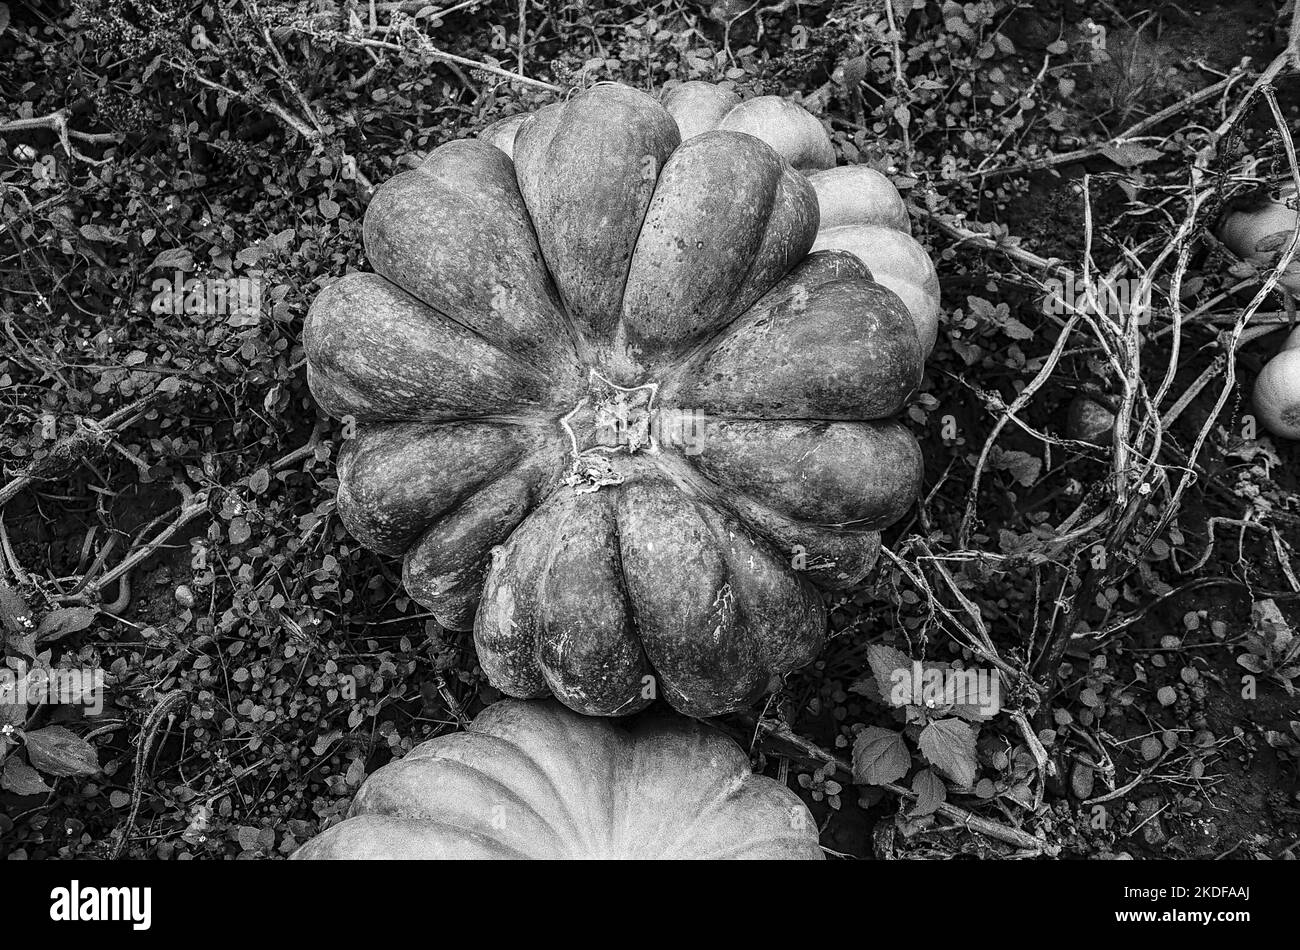 Pumpkin in autumn in Switzerland shot with Black and white analogue film technique Stock Photo